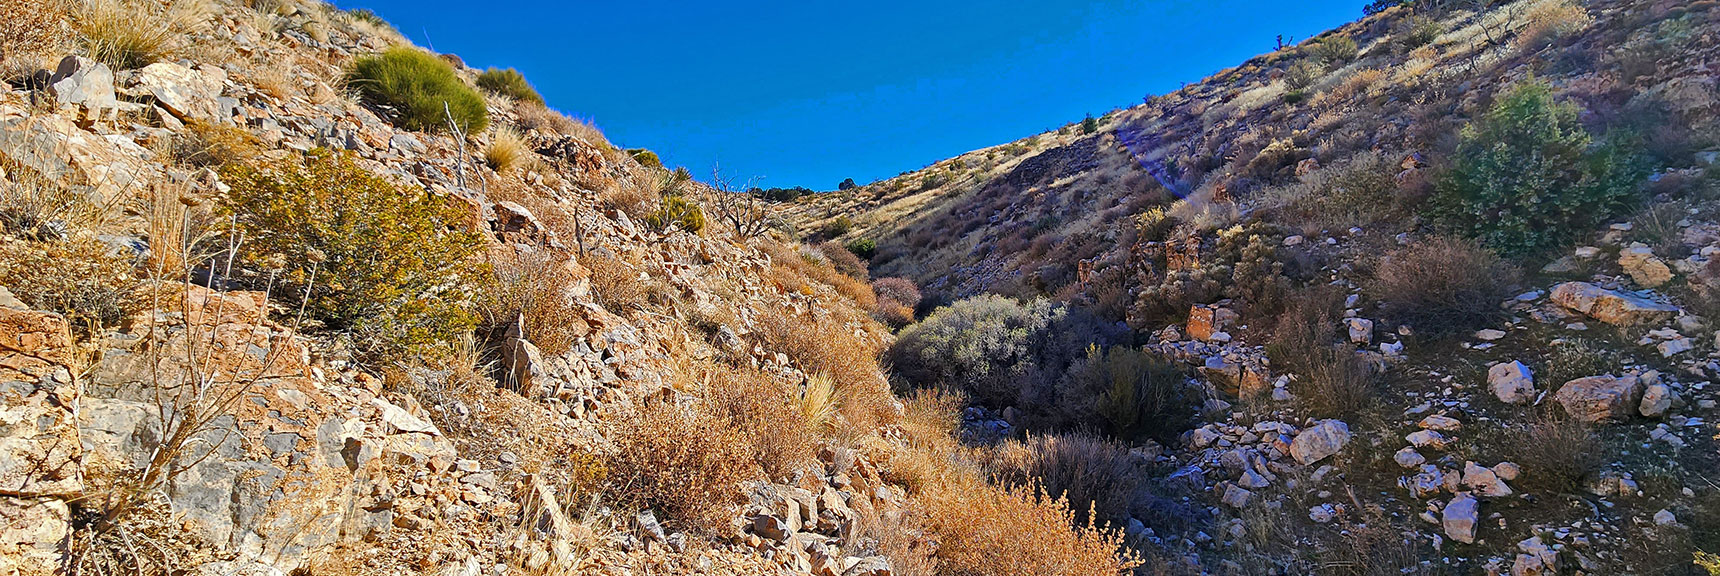 Closing in on Bluff Summit. Chute is Easy Going All the Way Up | Landmark Bluff Summit | Lovell Canyon, Nevada